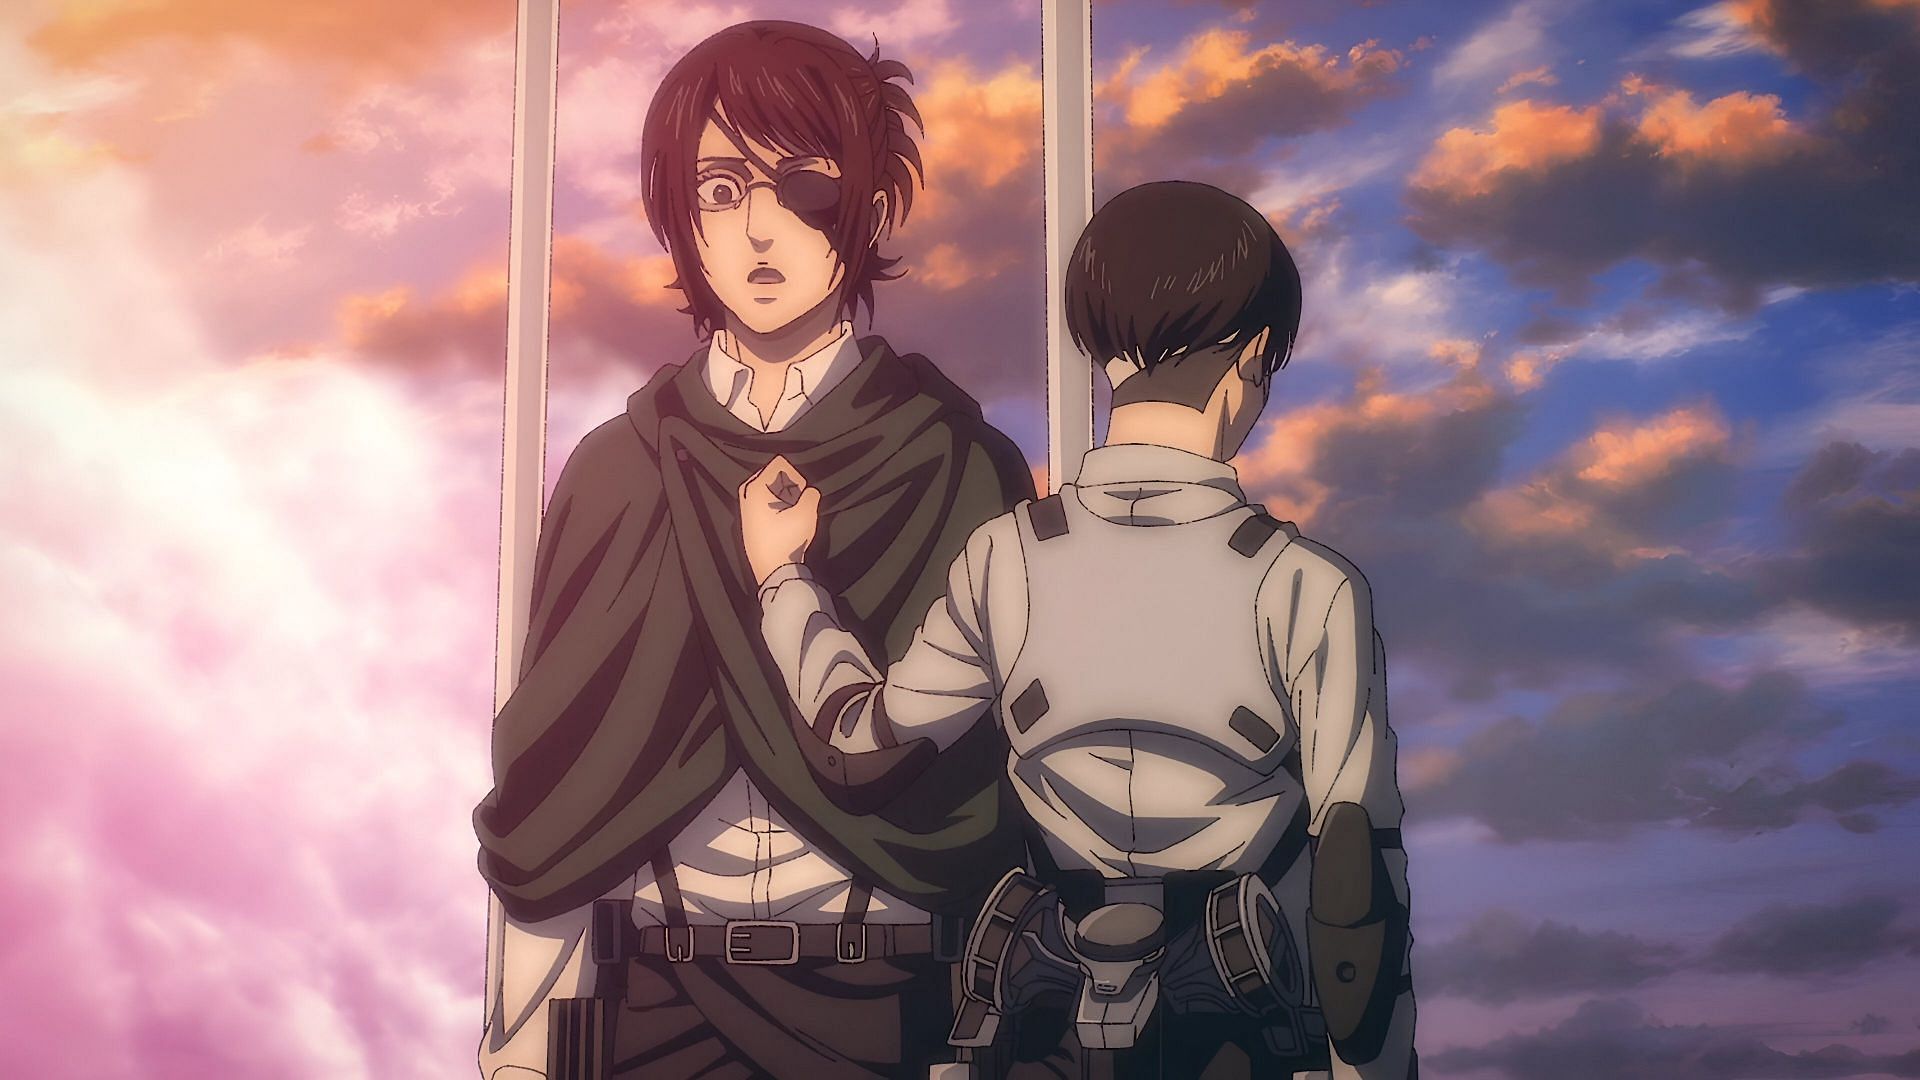 Hange (left) and Levi (right) as seen in the anime (Image via MAPPA)